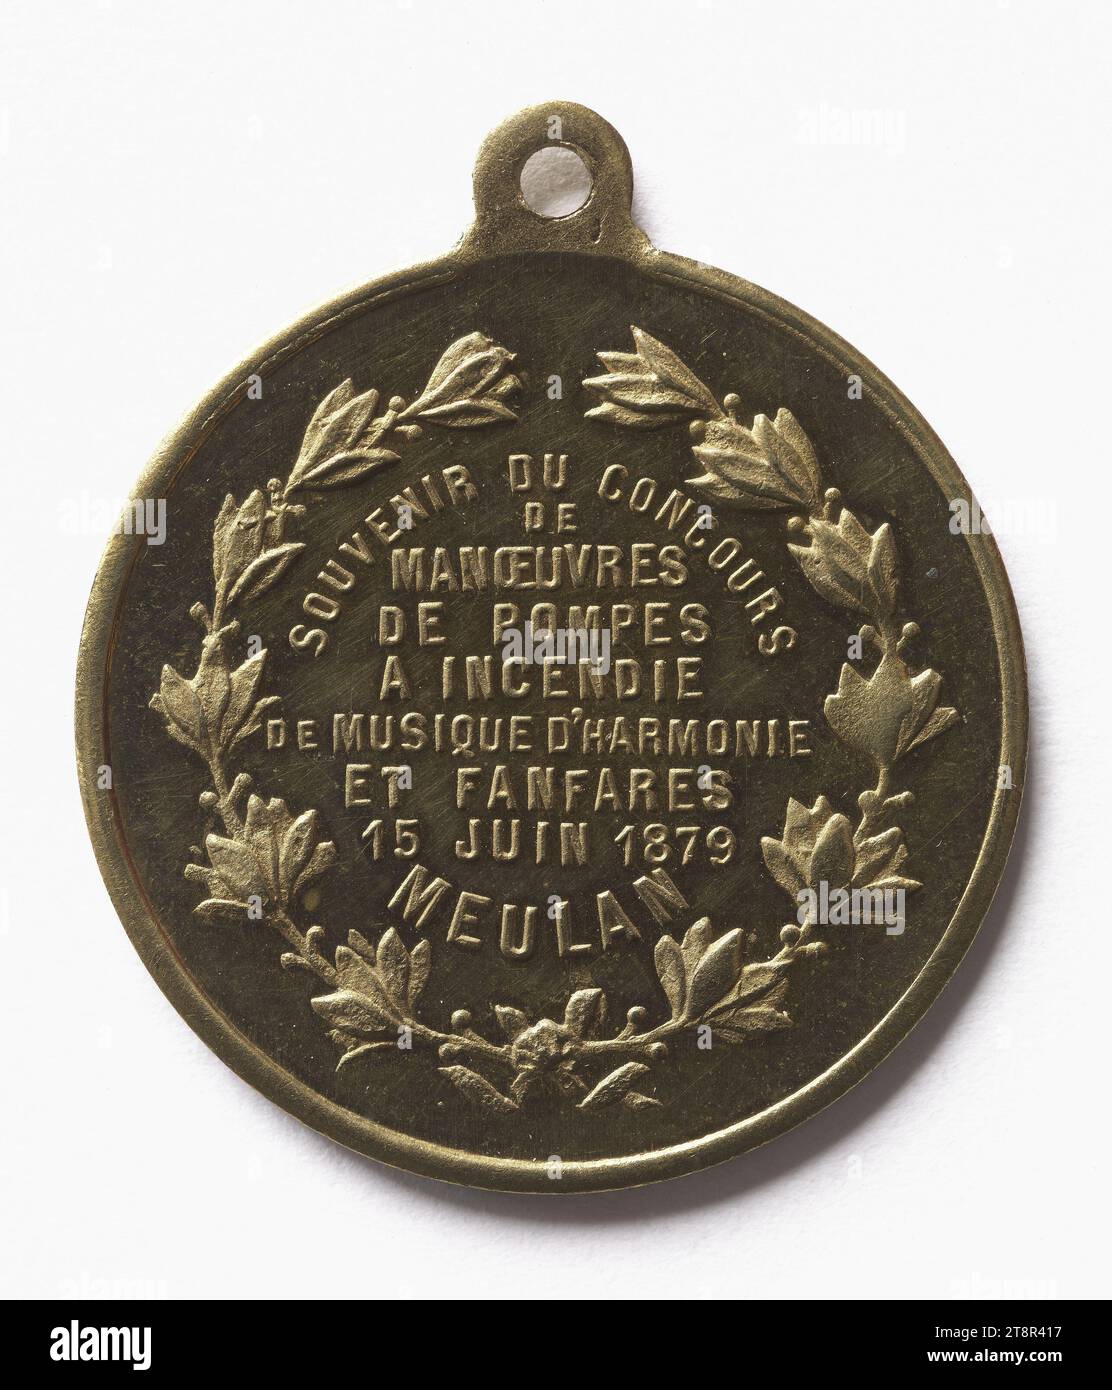 Souvenir of the fire pump drill contest in Meulan, June 15, 1879, Array, Numismatic, Medal, Copper, Gilt = gilding, Dimensions - Work: Diameter: 3.3 cm, Weight (type dimension): 8.7 g Stock Photo